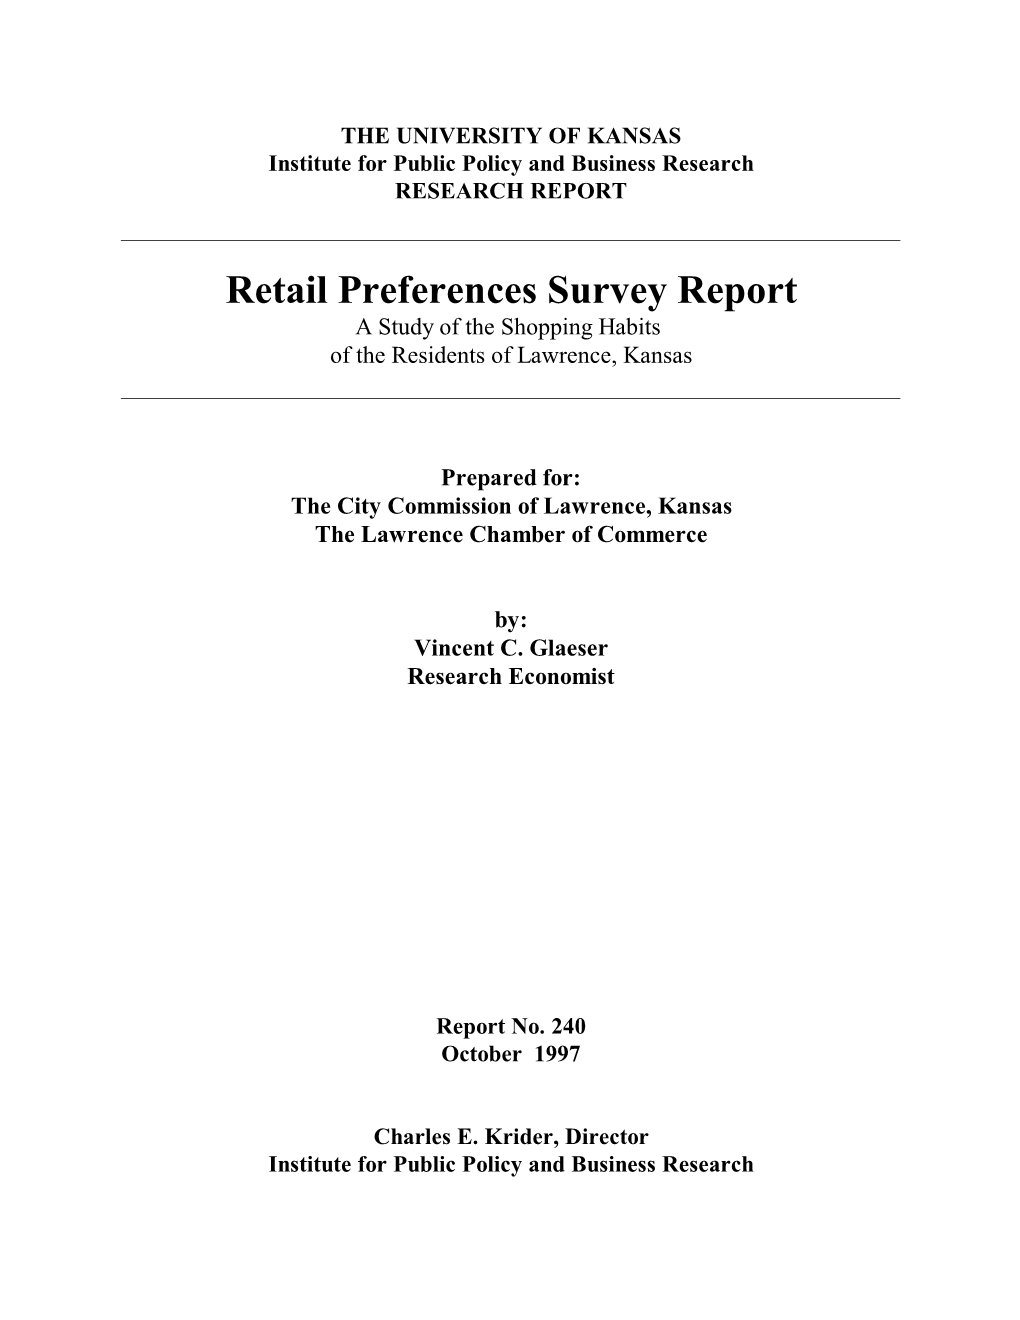 Retail Preferences Survey Report a Study of the Shopping Habits of the Residents of Lawrence, Kansas